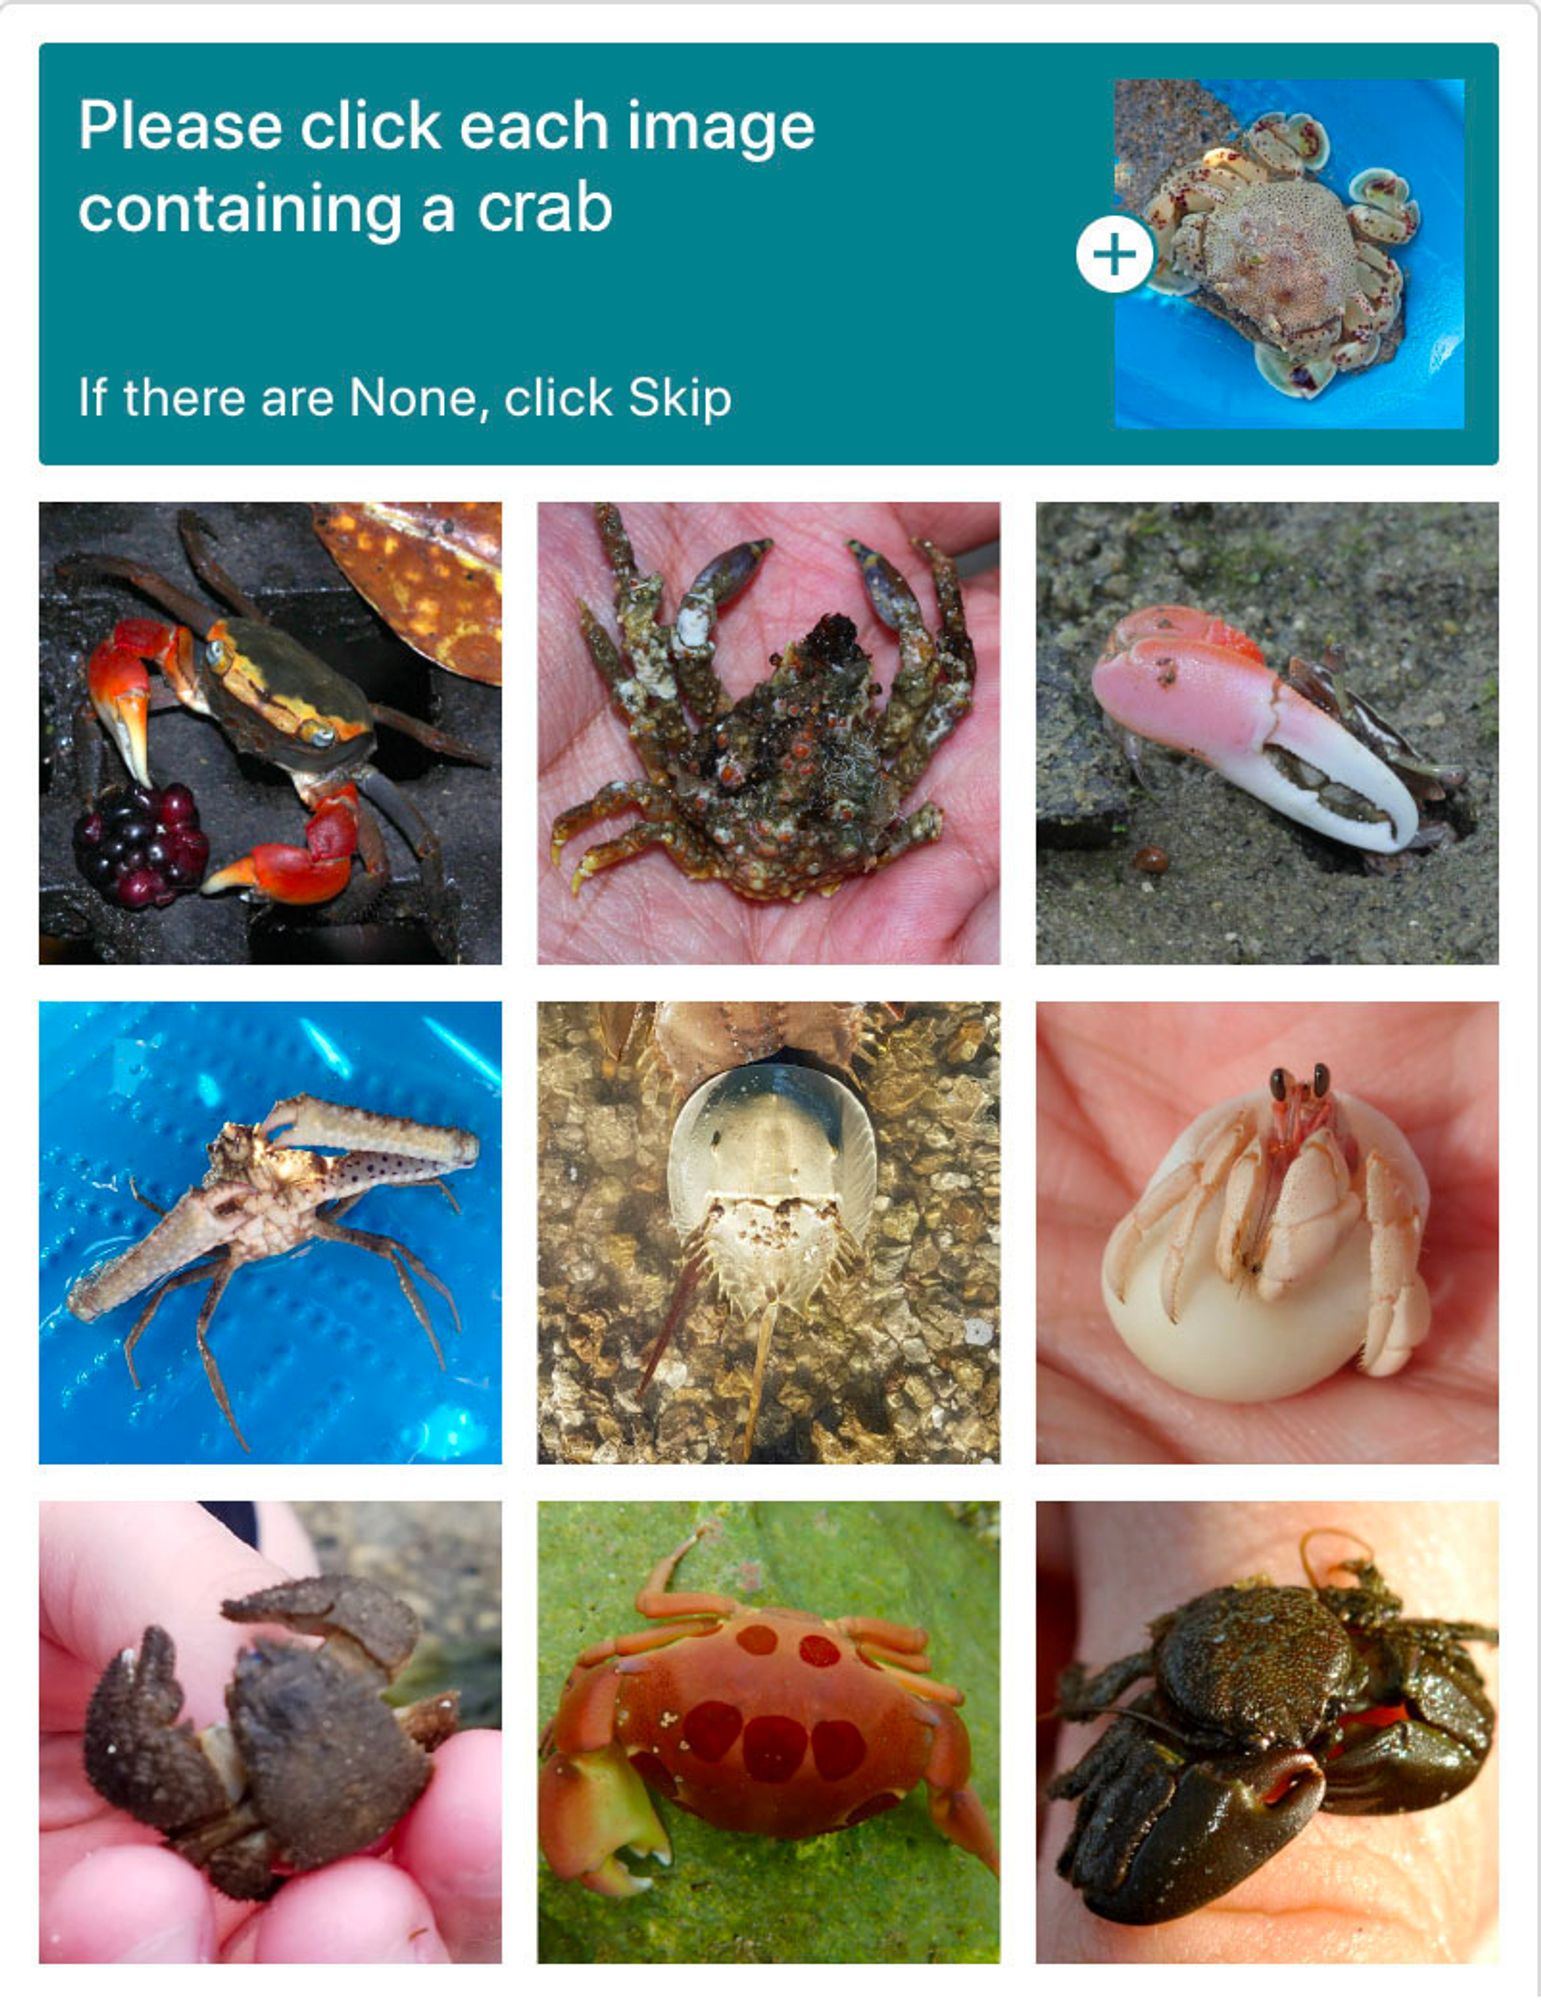 spoof captcha telling people to click on images containing crabs, but the images are of various true crabs and false crabs